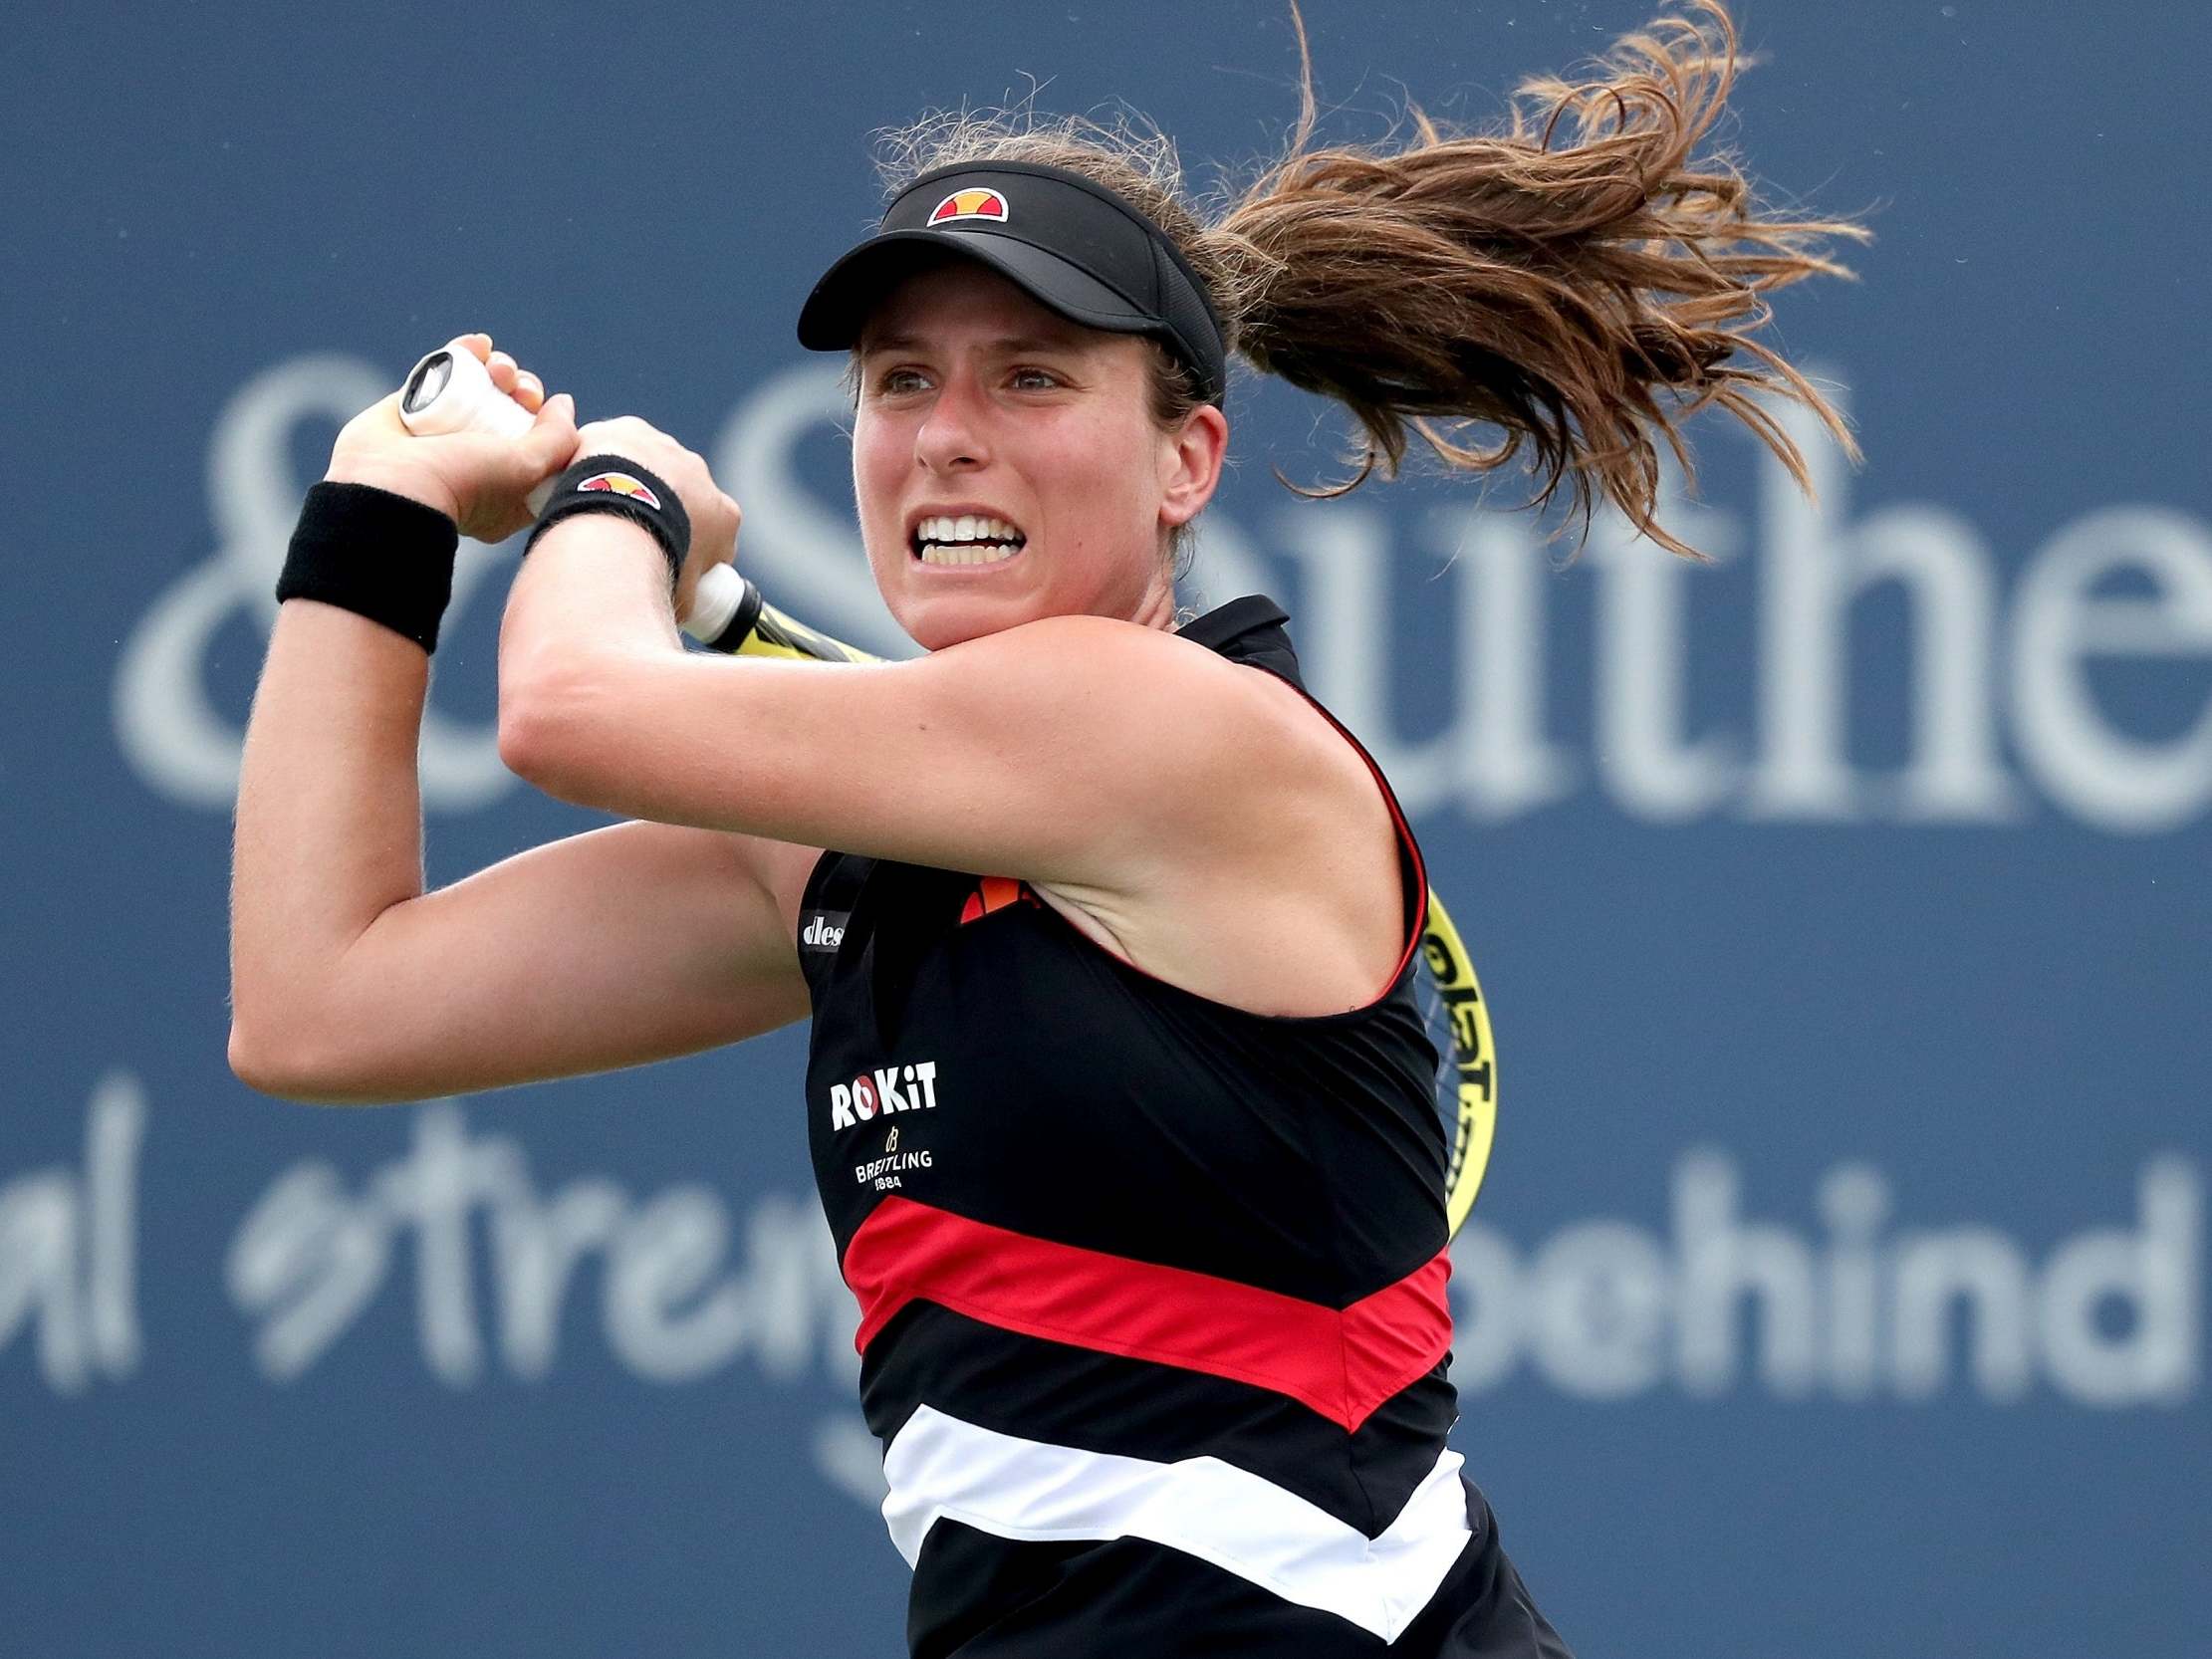 Johanna Konta vs Daria Kasatkina live stream How to watch US Open match online for free The Independent The Independent